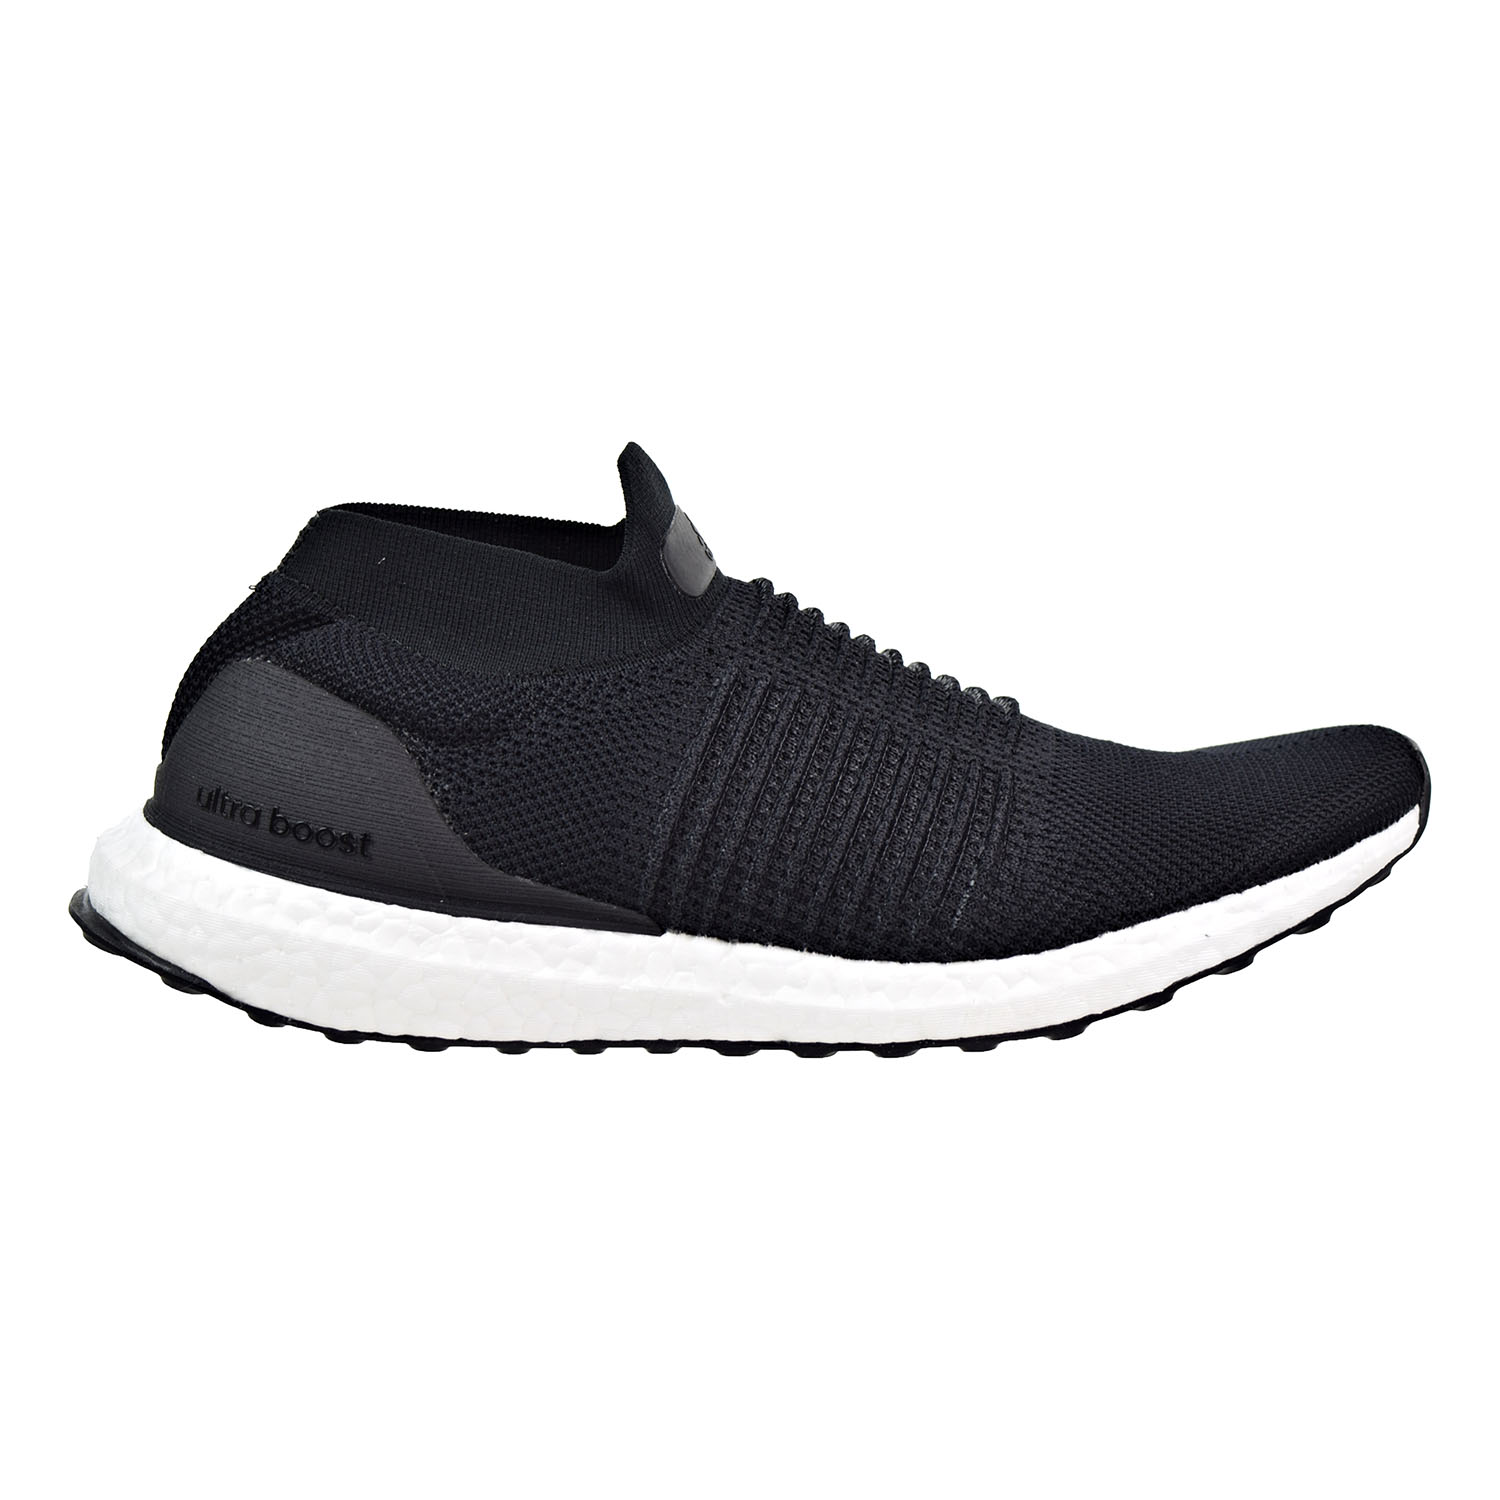 Running Shoes Core Black s80770 